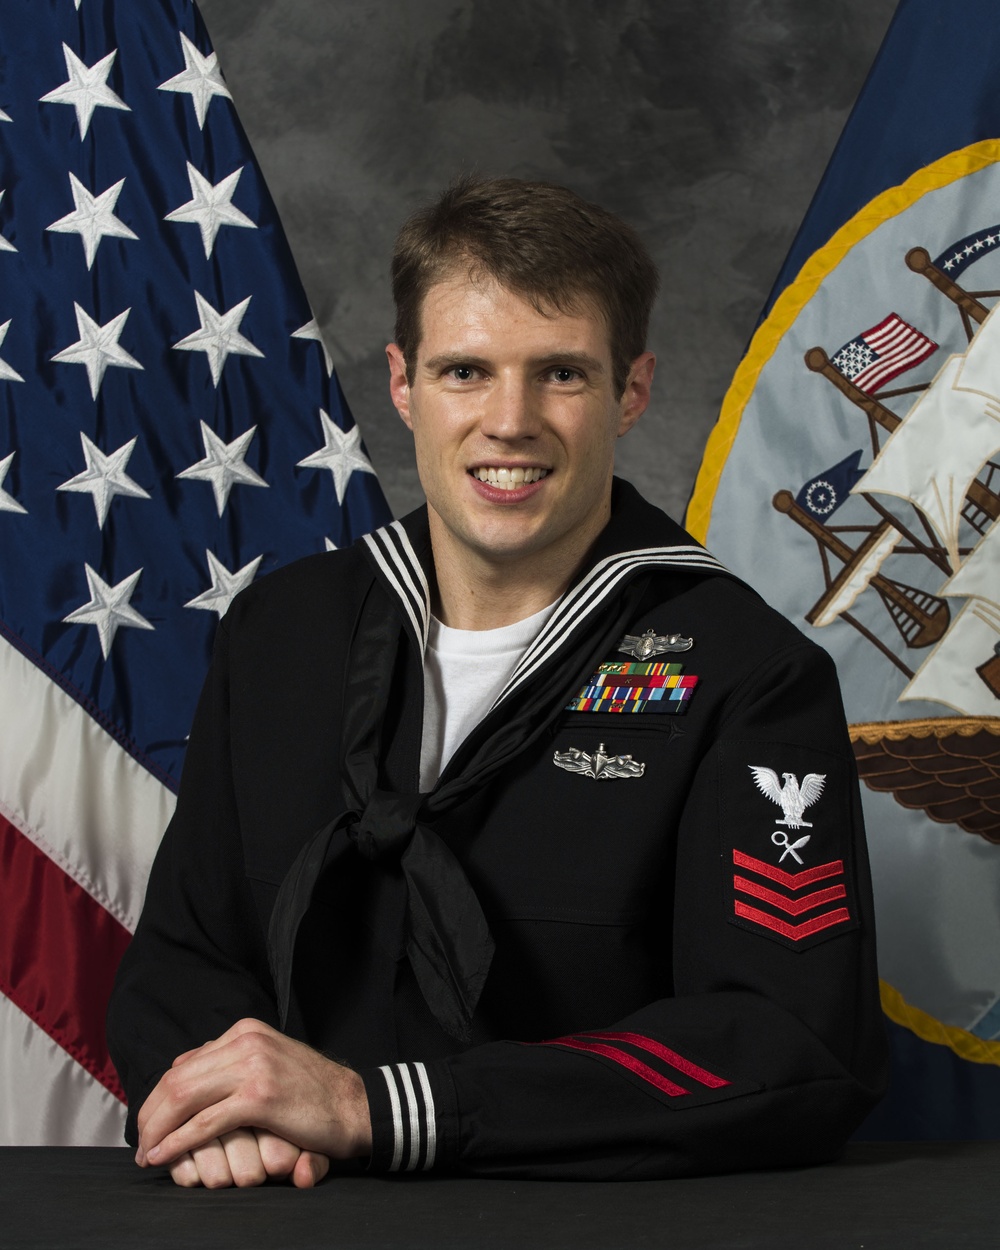 West Deptford, NJ native is Submarine Group 7’s Sailor of the Year